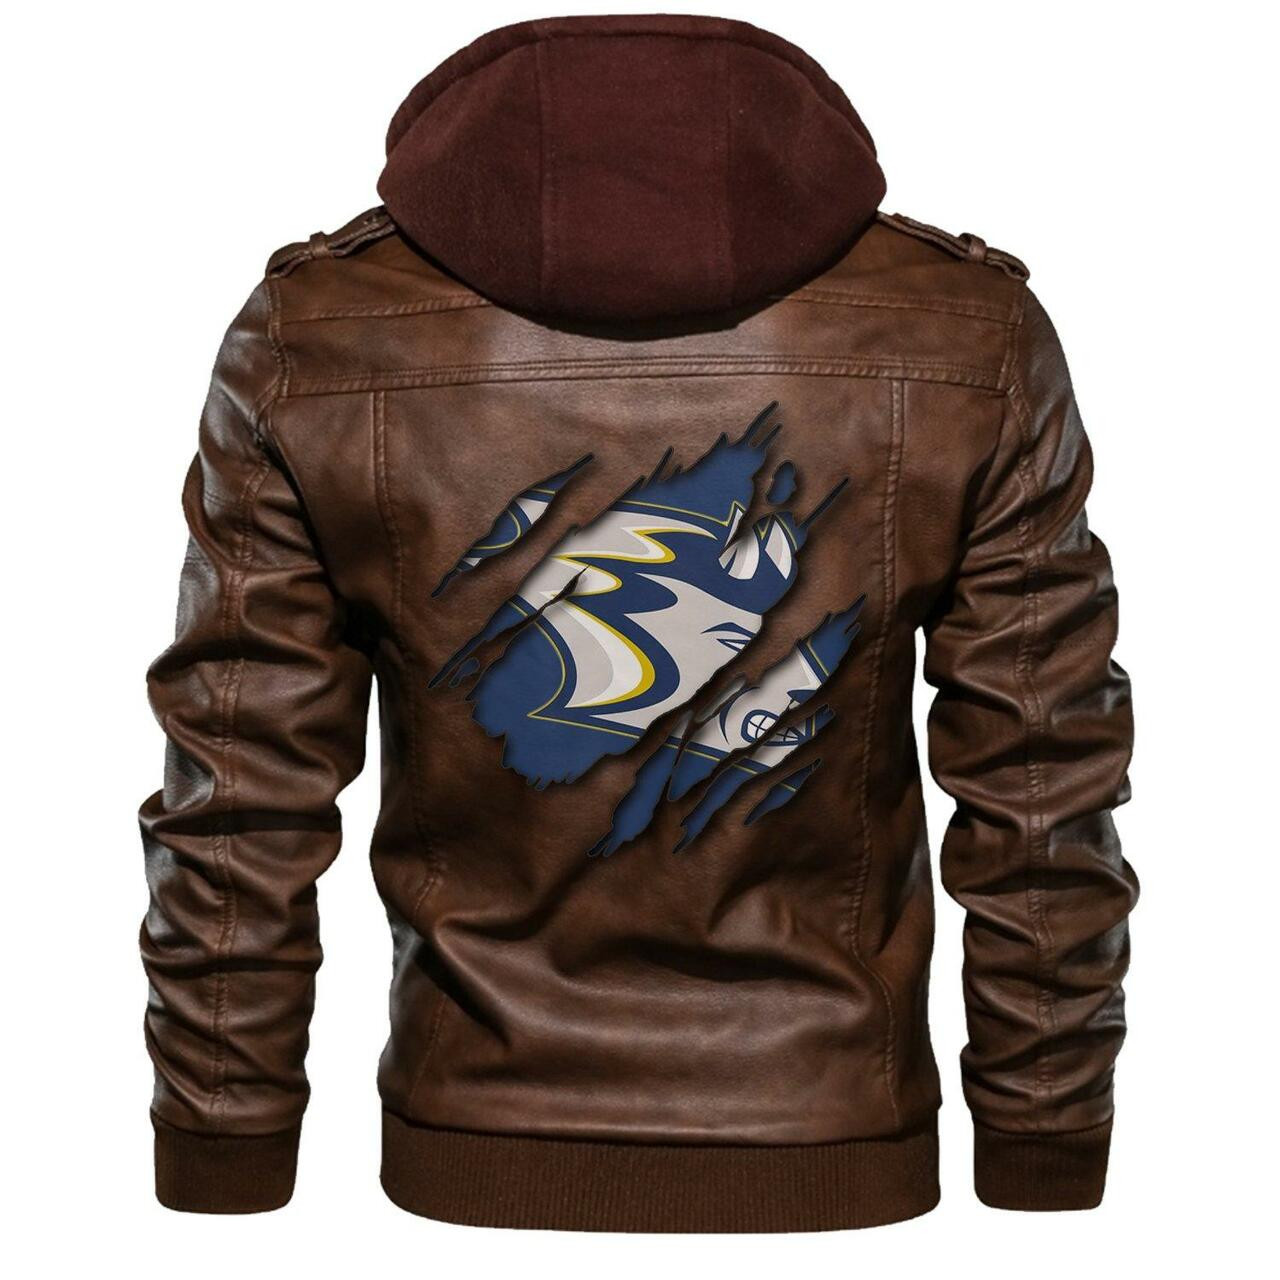 Our store has all of the latest leather jacket 174